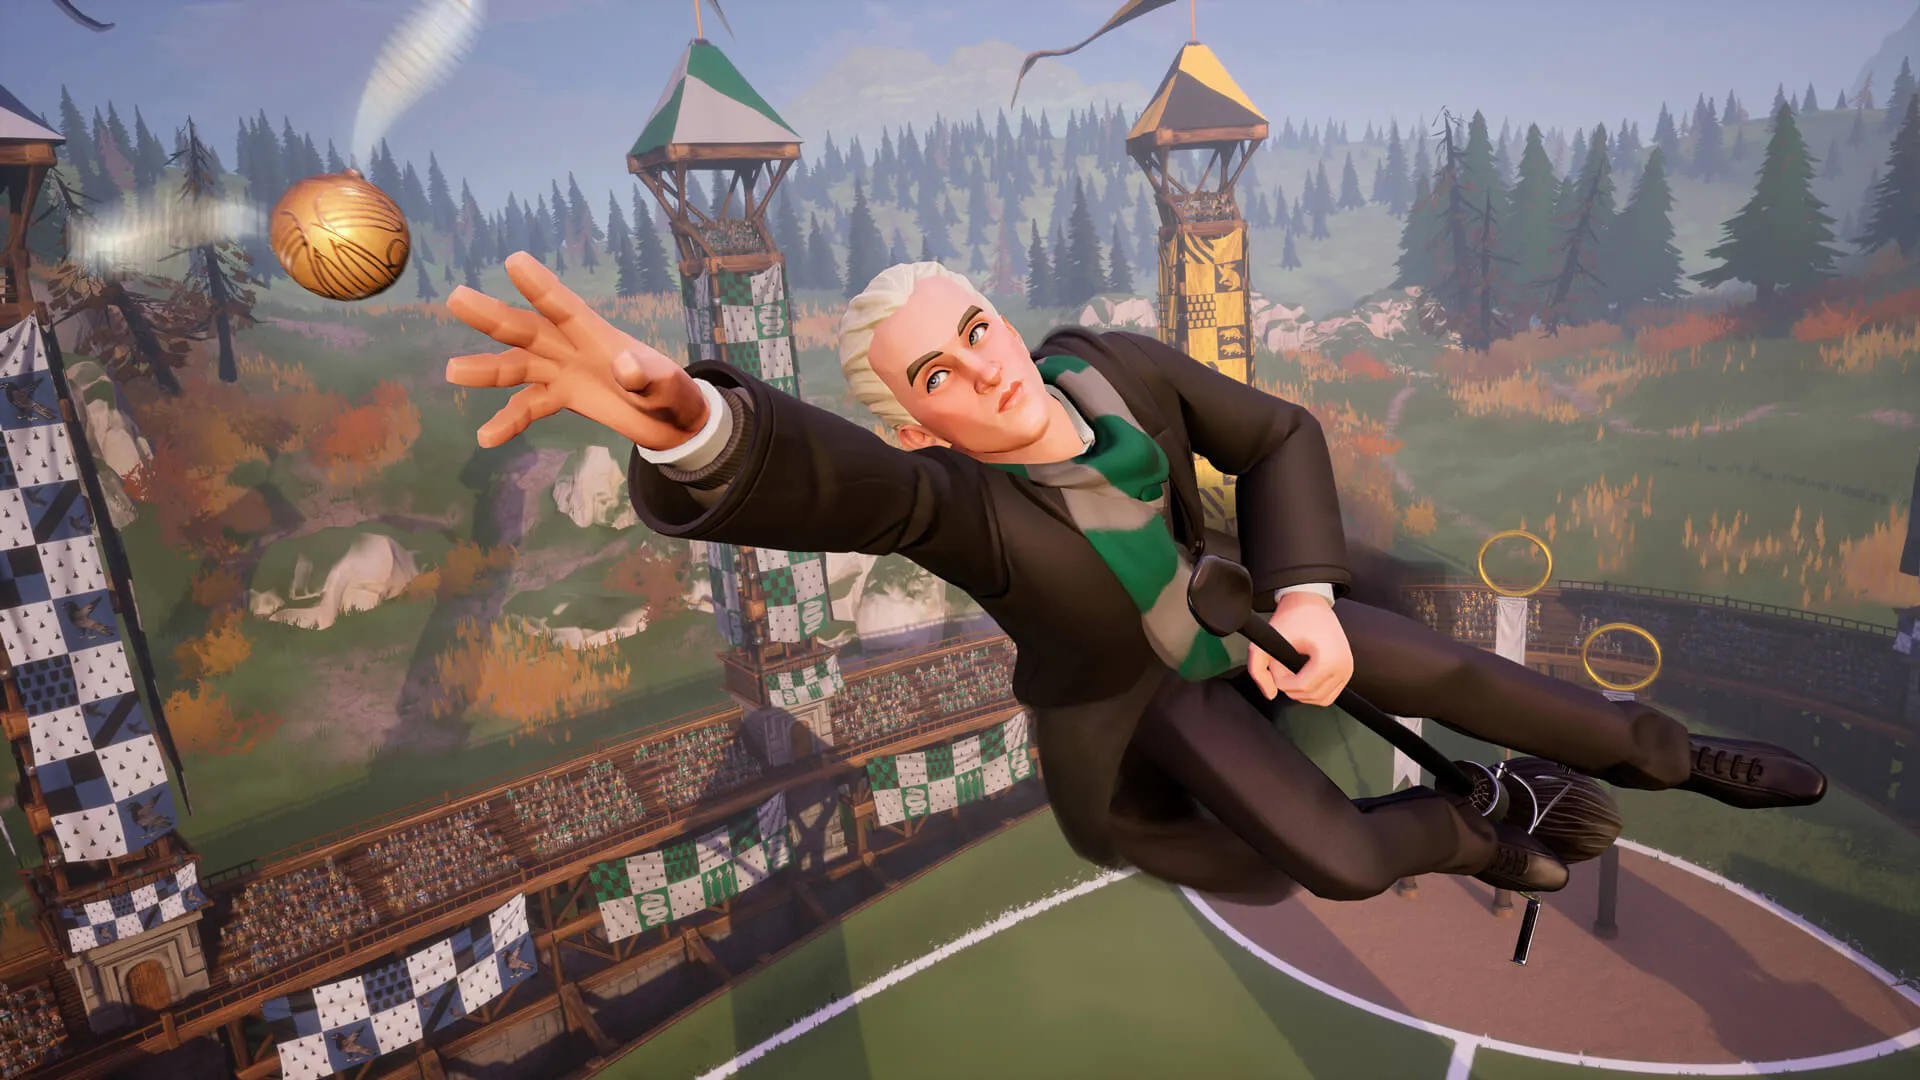 Harry Potter: Quidditch Champions - Release Date, Platforms & More